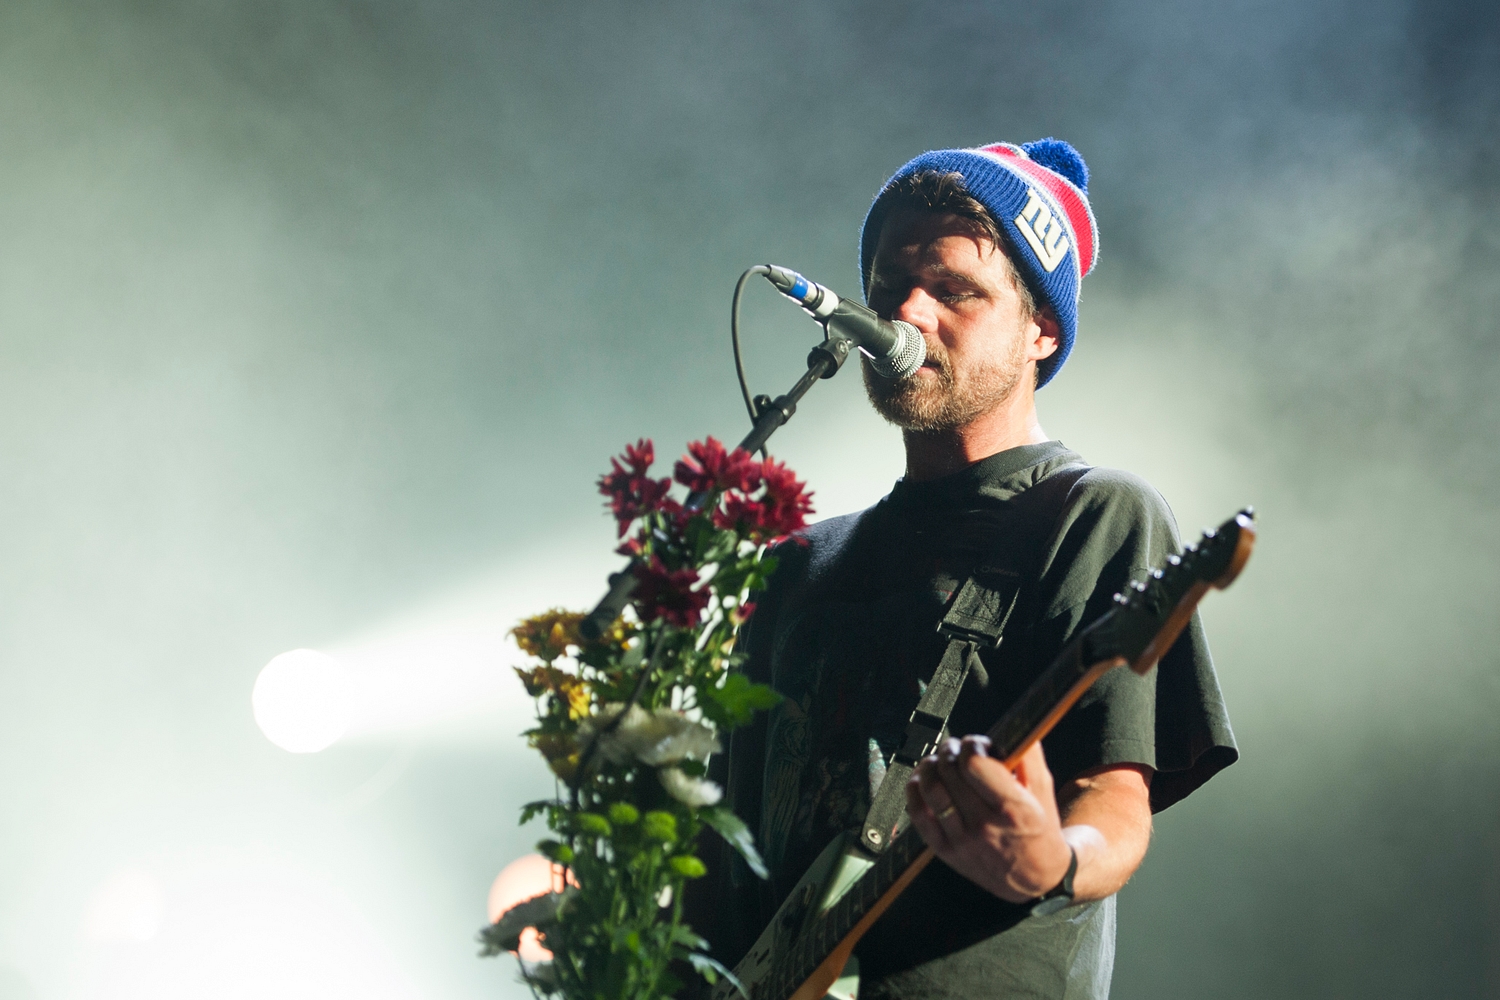 Brand New frontman Jesse Lacey says the band are going away “for a while”